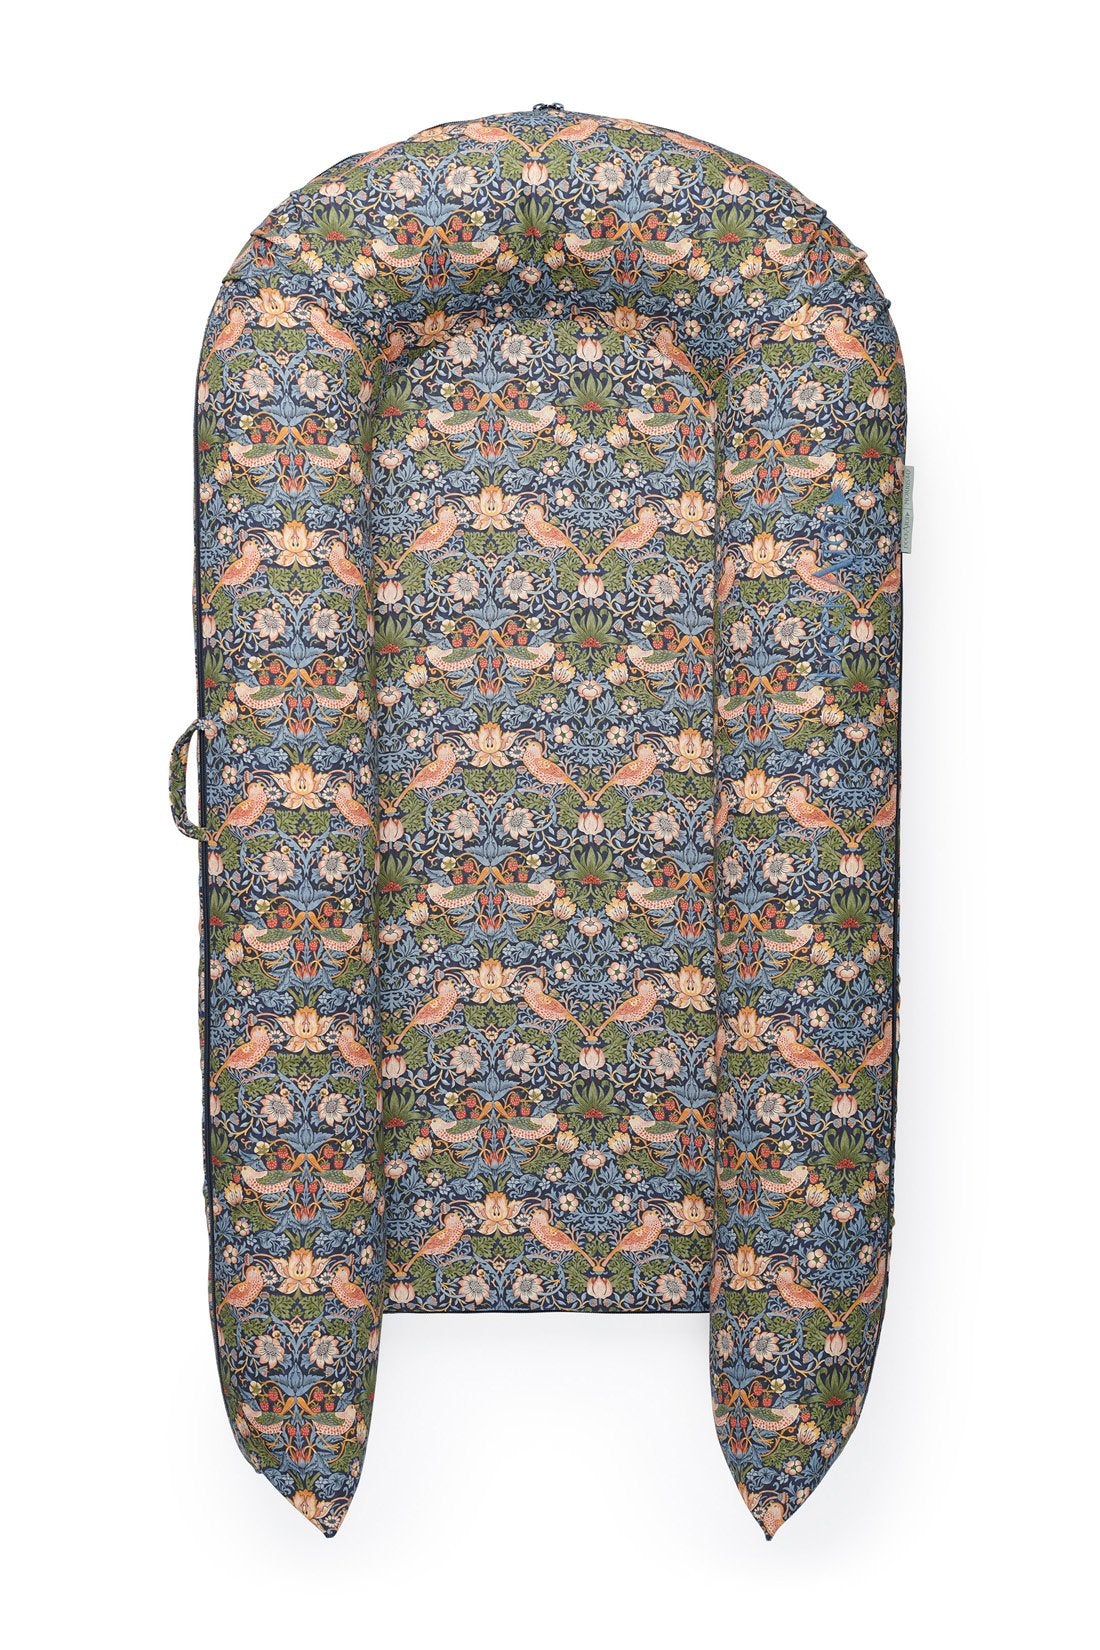 DockATot Grand Dock, Perfect for Lounging and Playtime Luxury Prints, -- ANB Baby